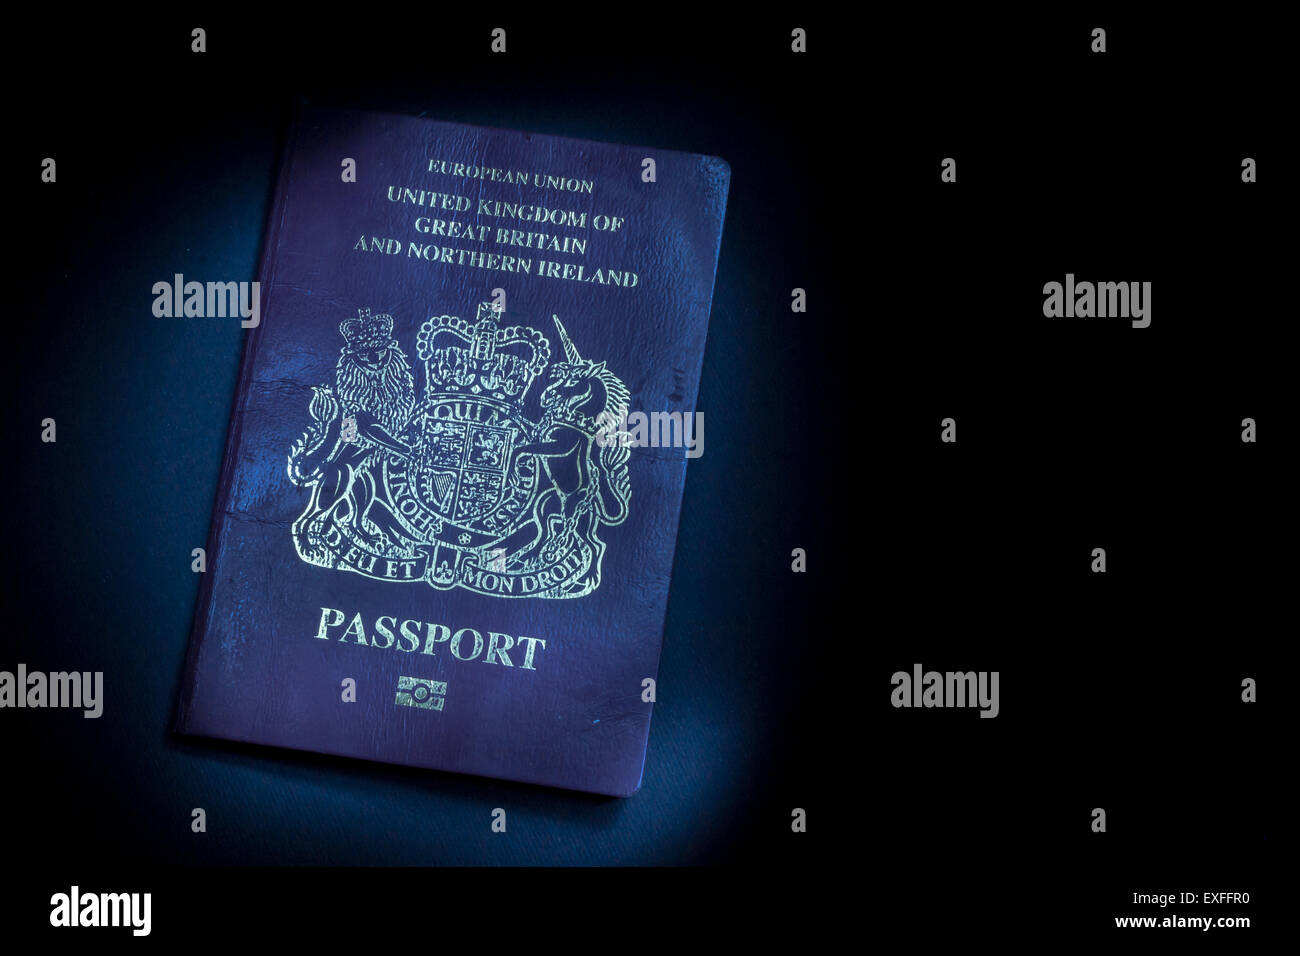 Single well used United Kingdom Passport in a dark shadow background Stock Photo